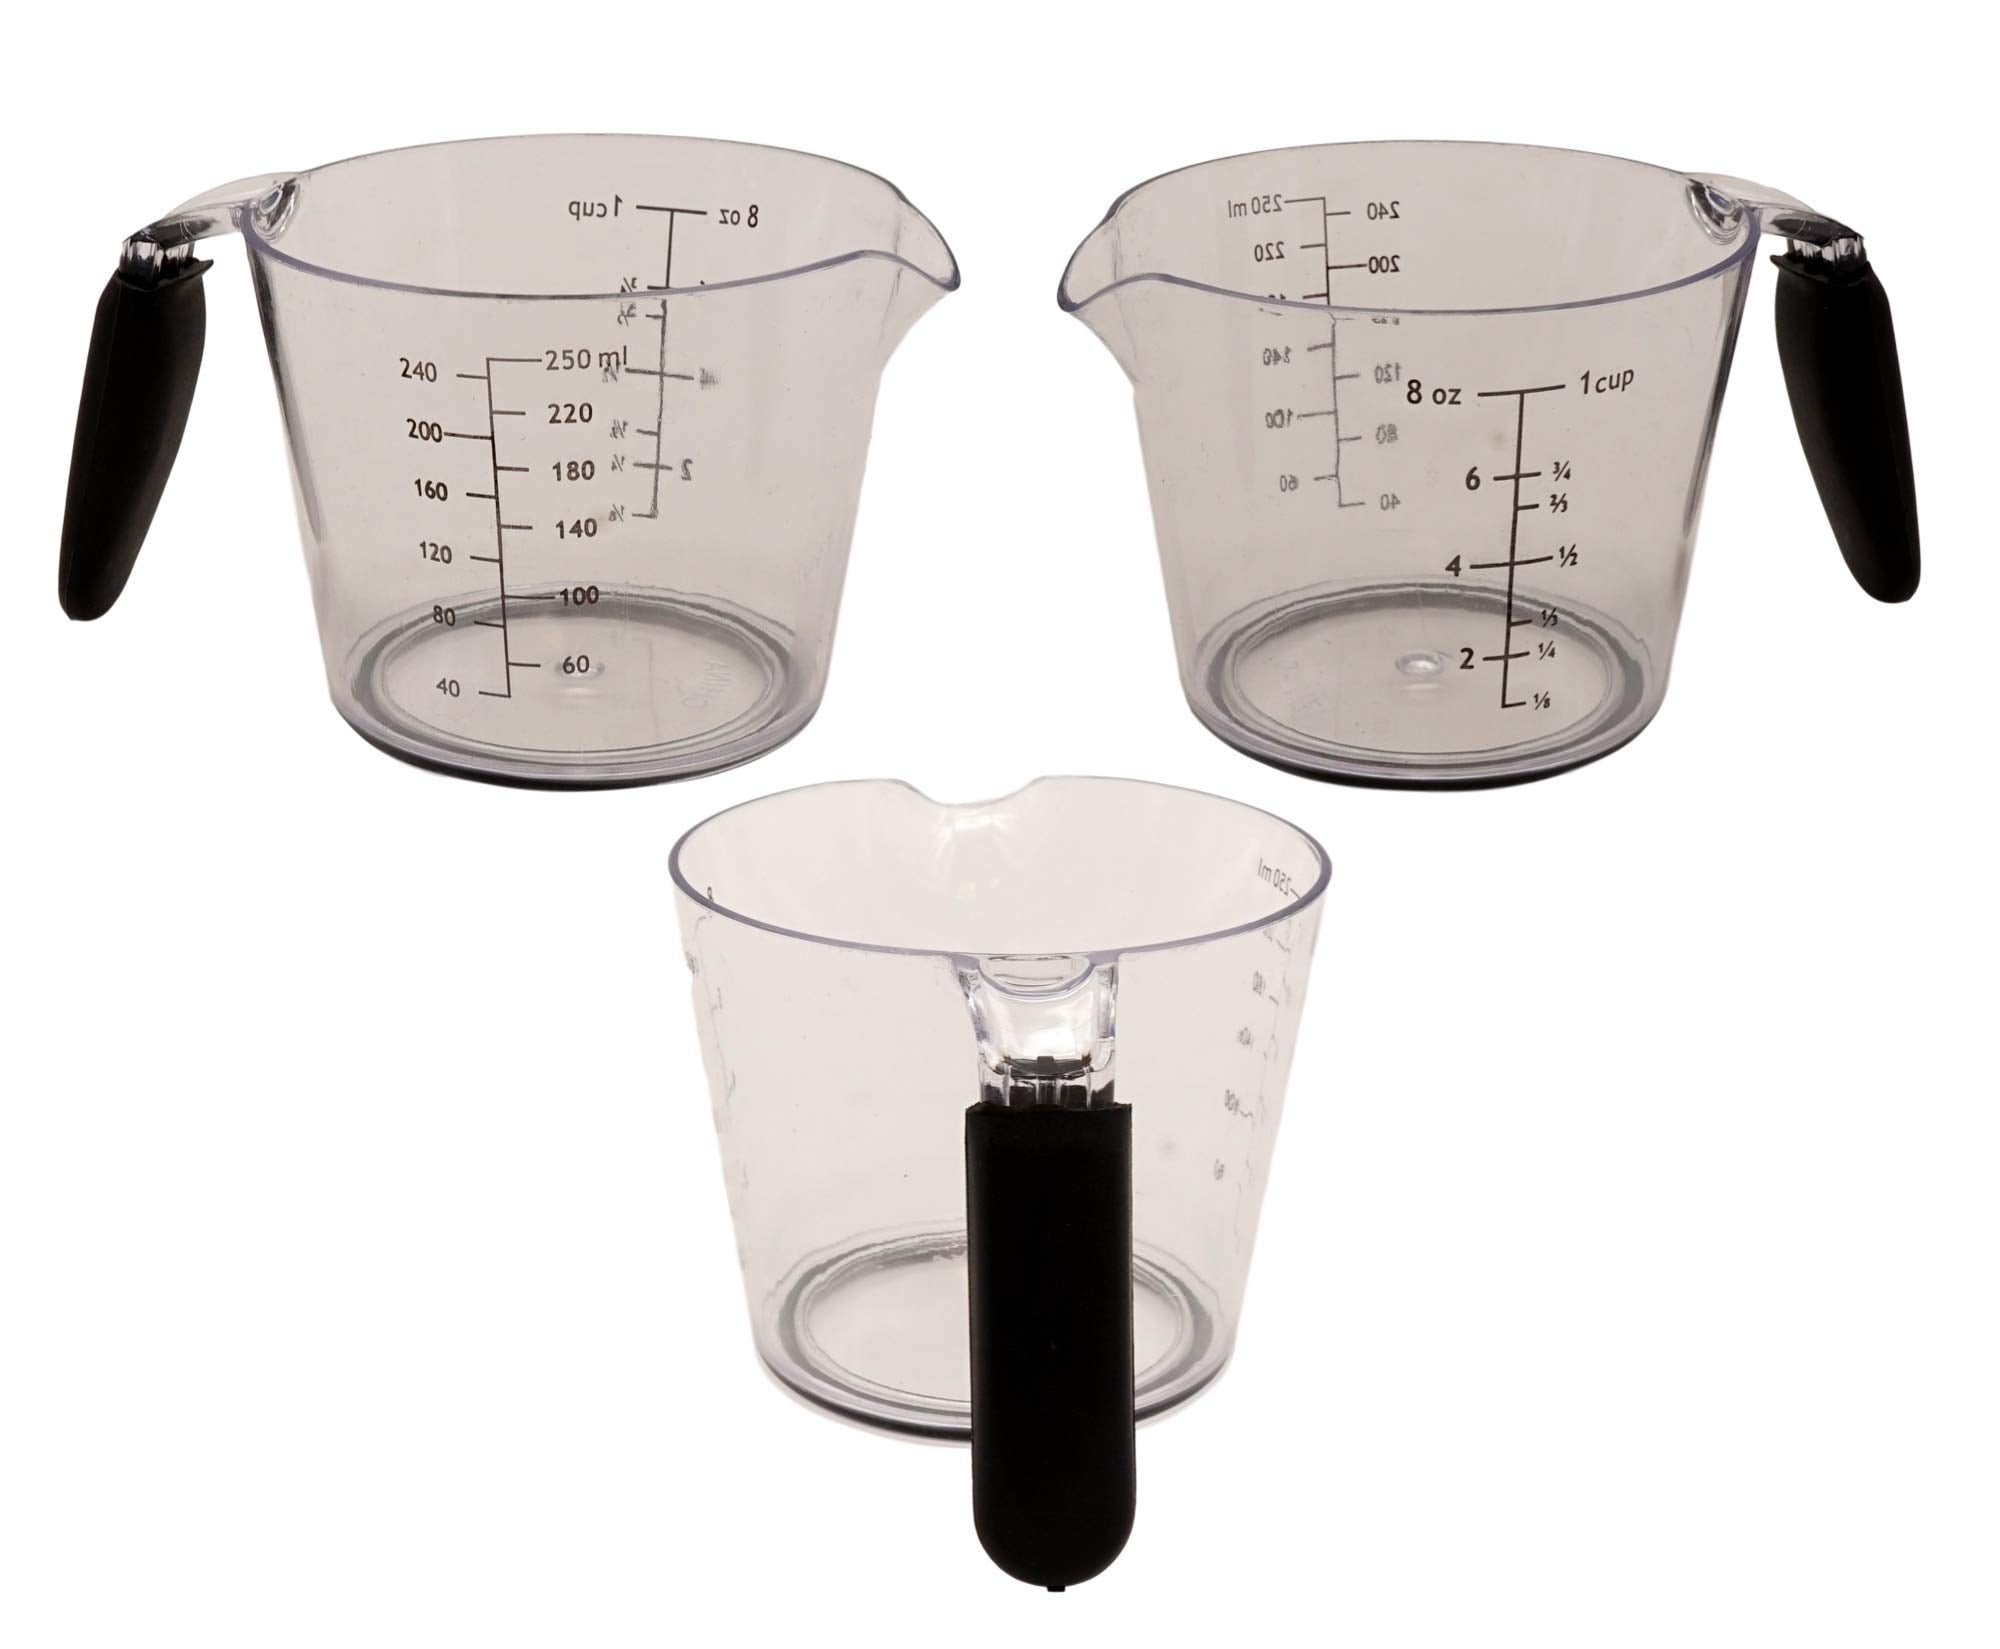 MEASURING CUP PLASTIC ONE CUP SOFTGRIP HANDLE B&C LABEL